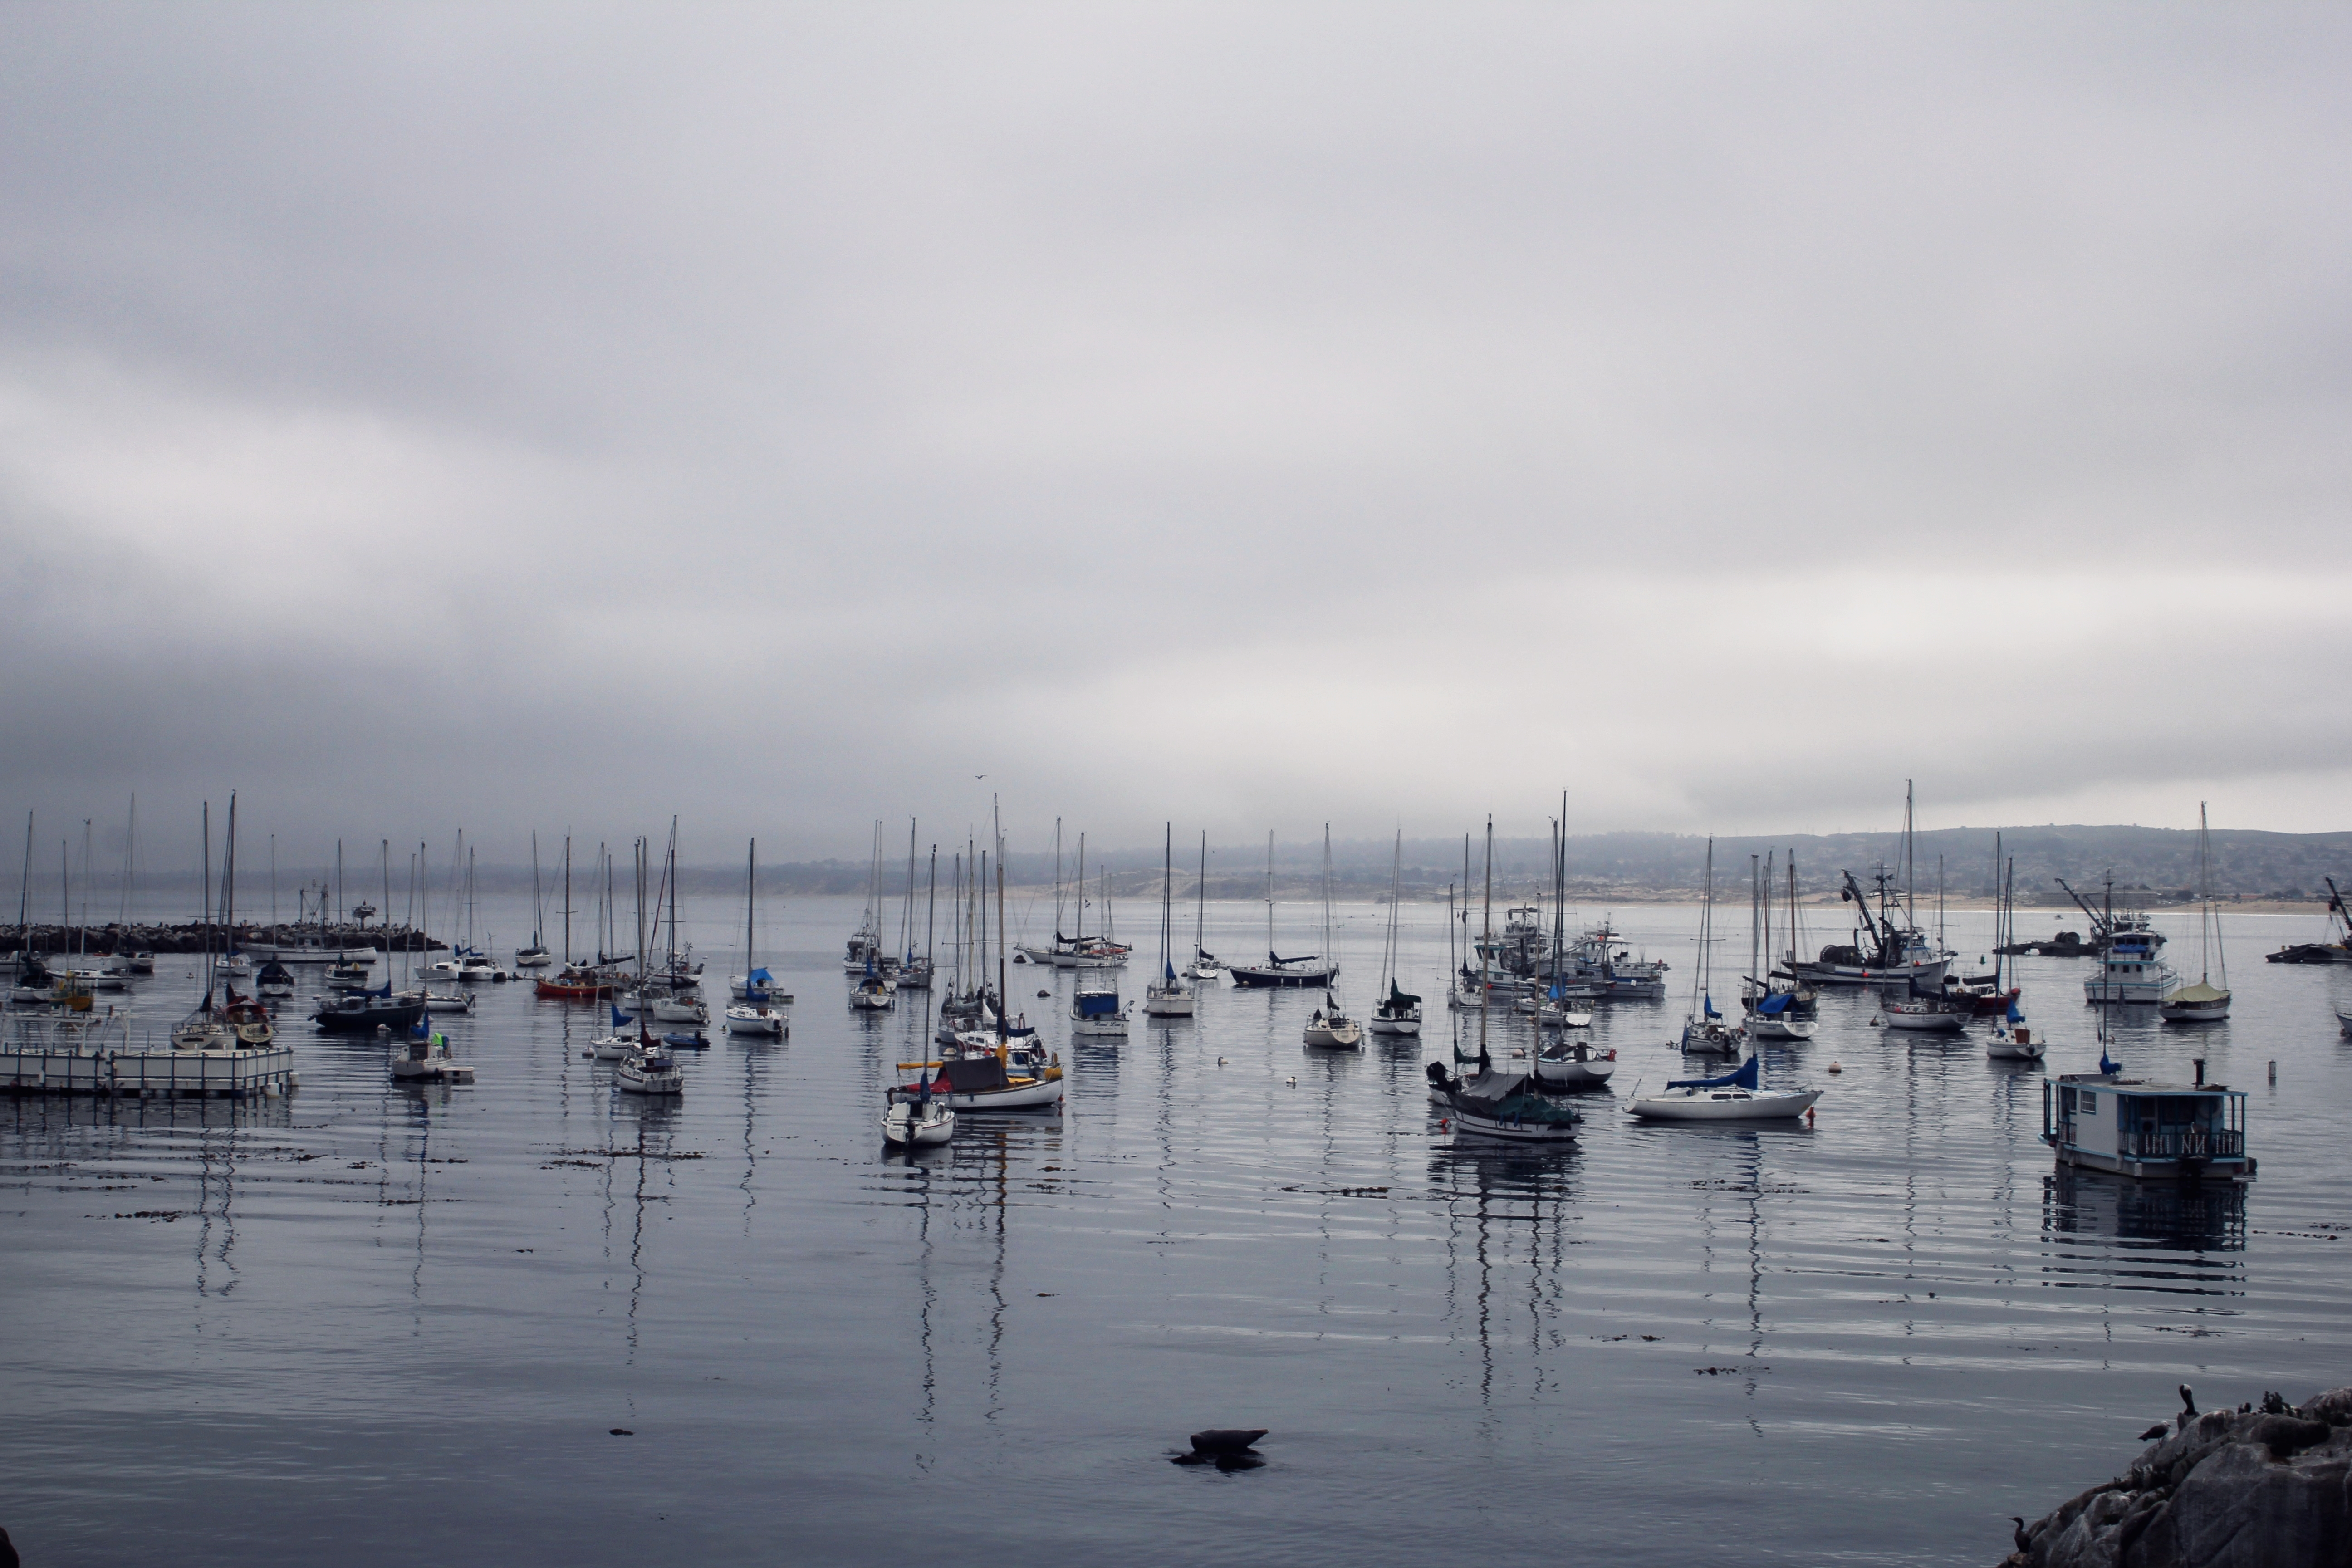 Harbour Boats at Monterey Bay, California